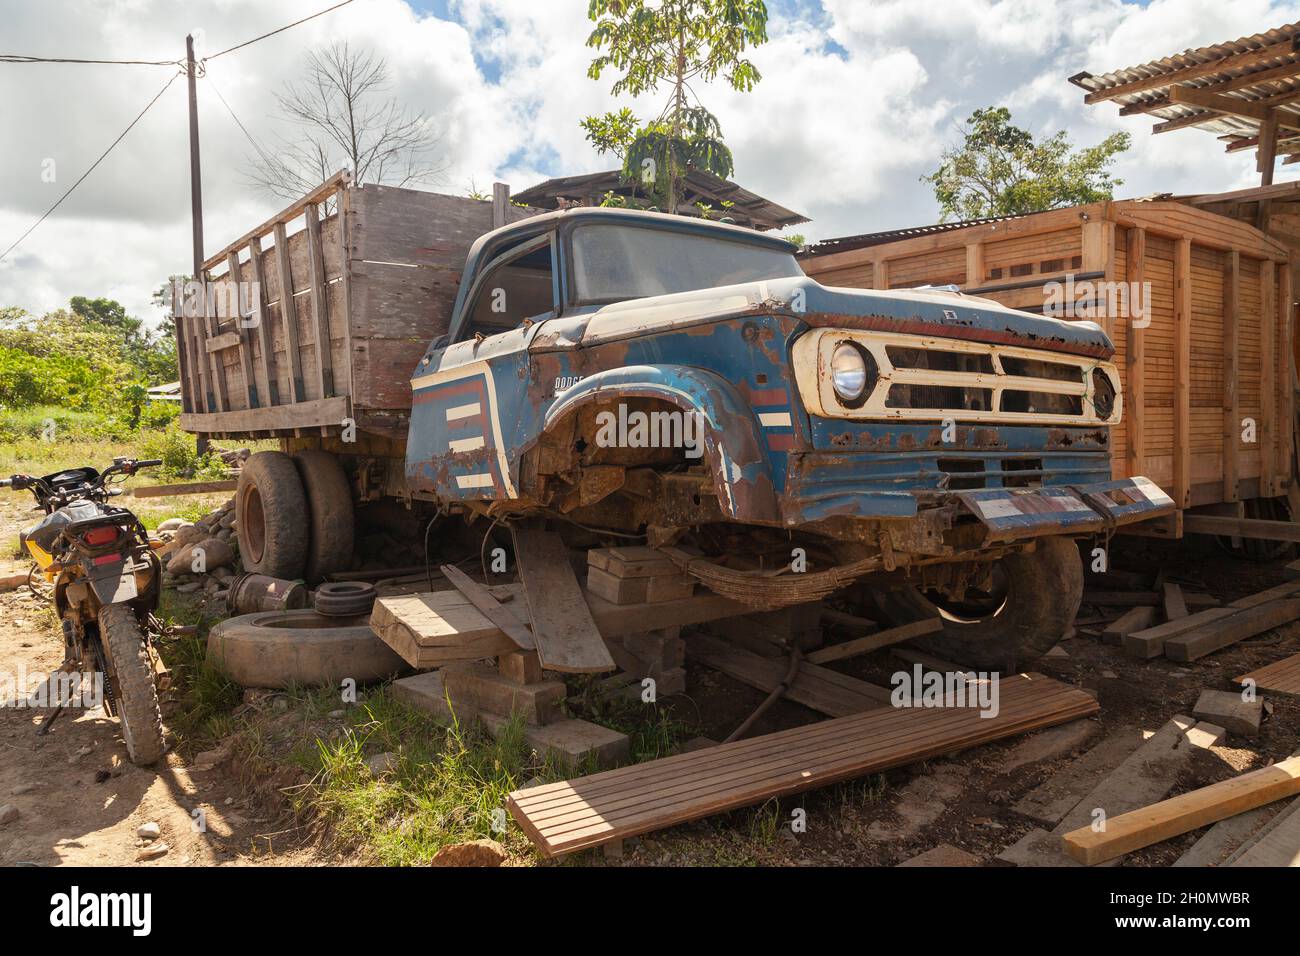 Pilcopata, Peru - April 12, 2014: An old rusty and abandoned truck, half scrapped, rests in one of the streets of Pilcopata Stock Photo